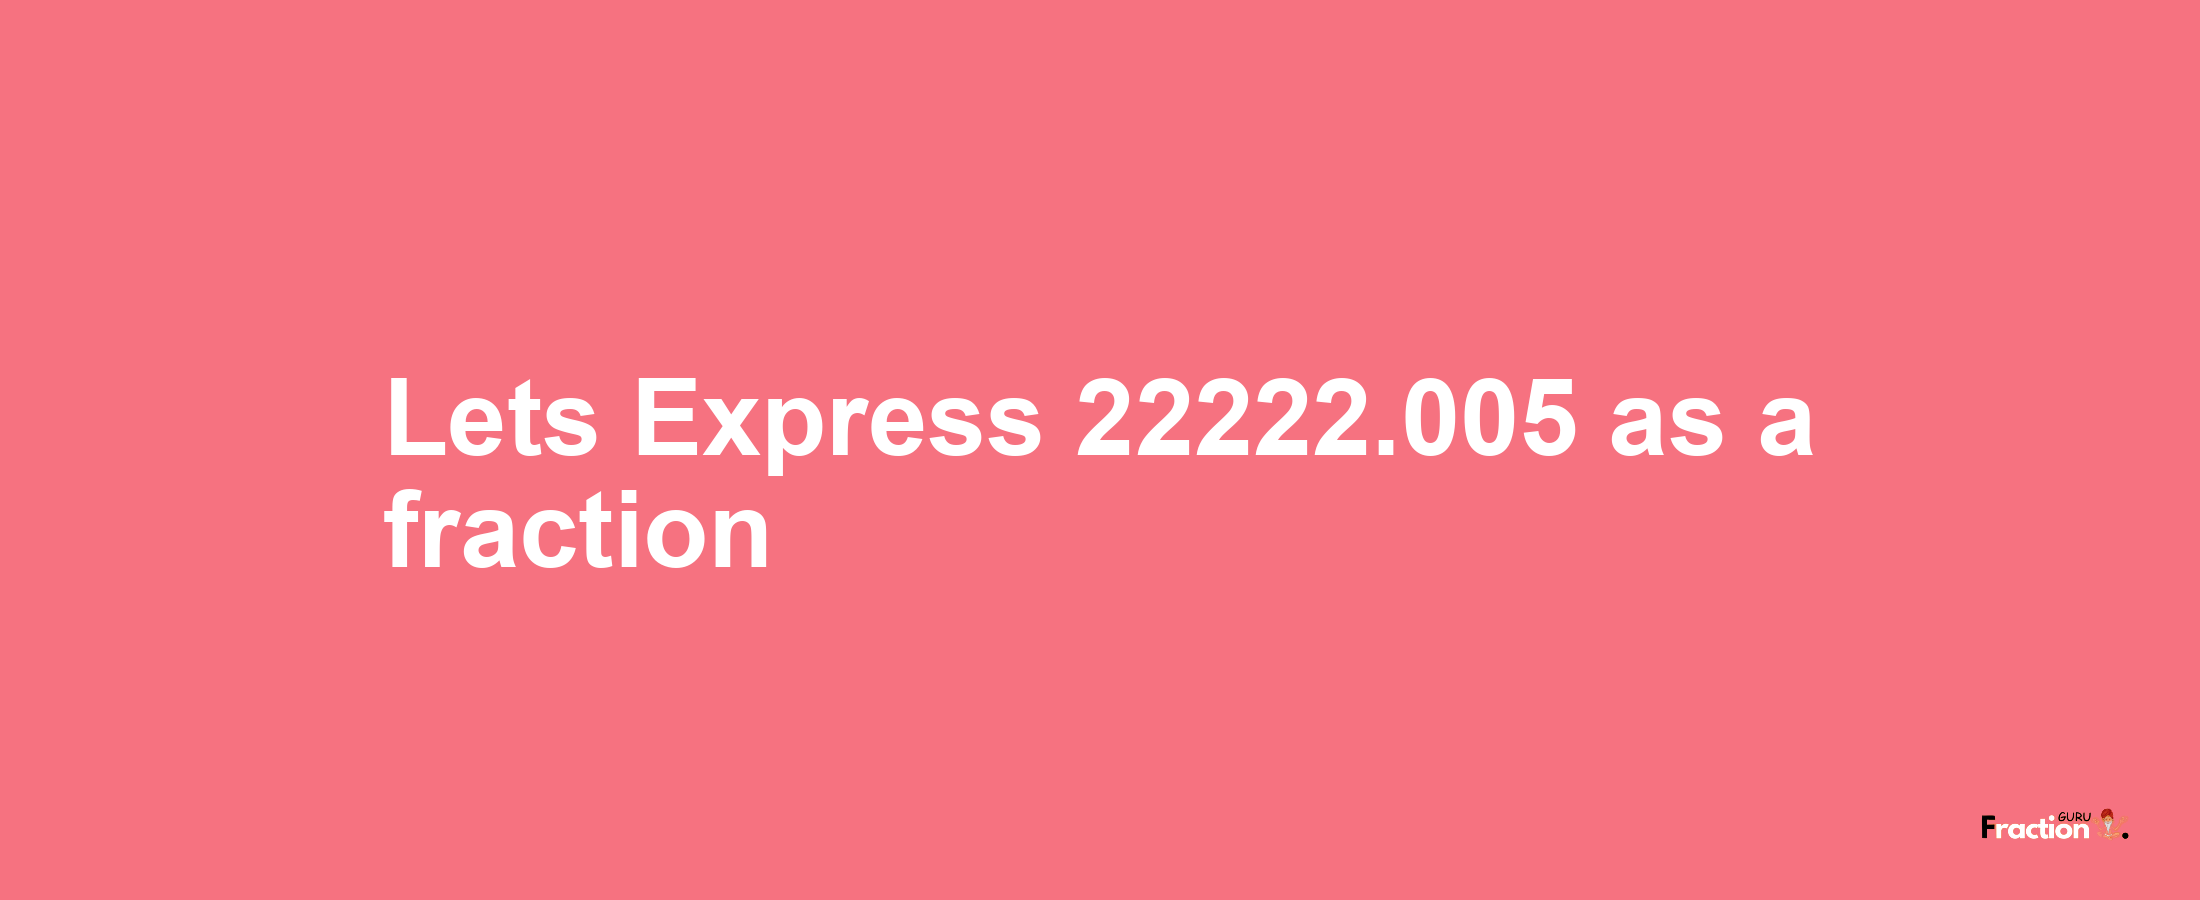 Lets Express 22222.005 as afraction